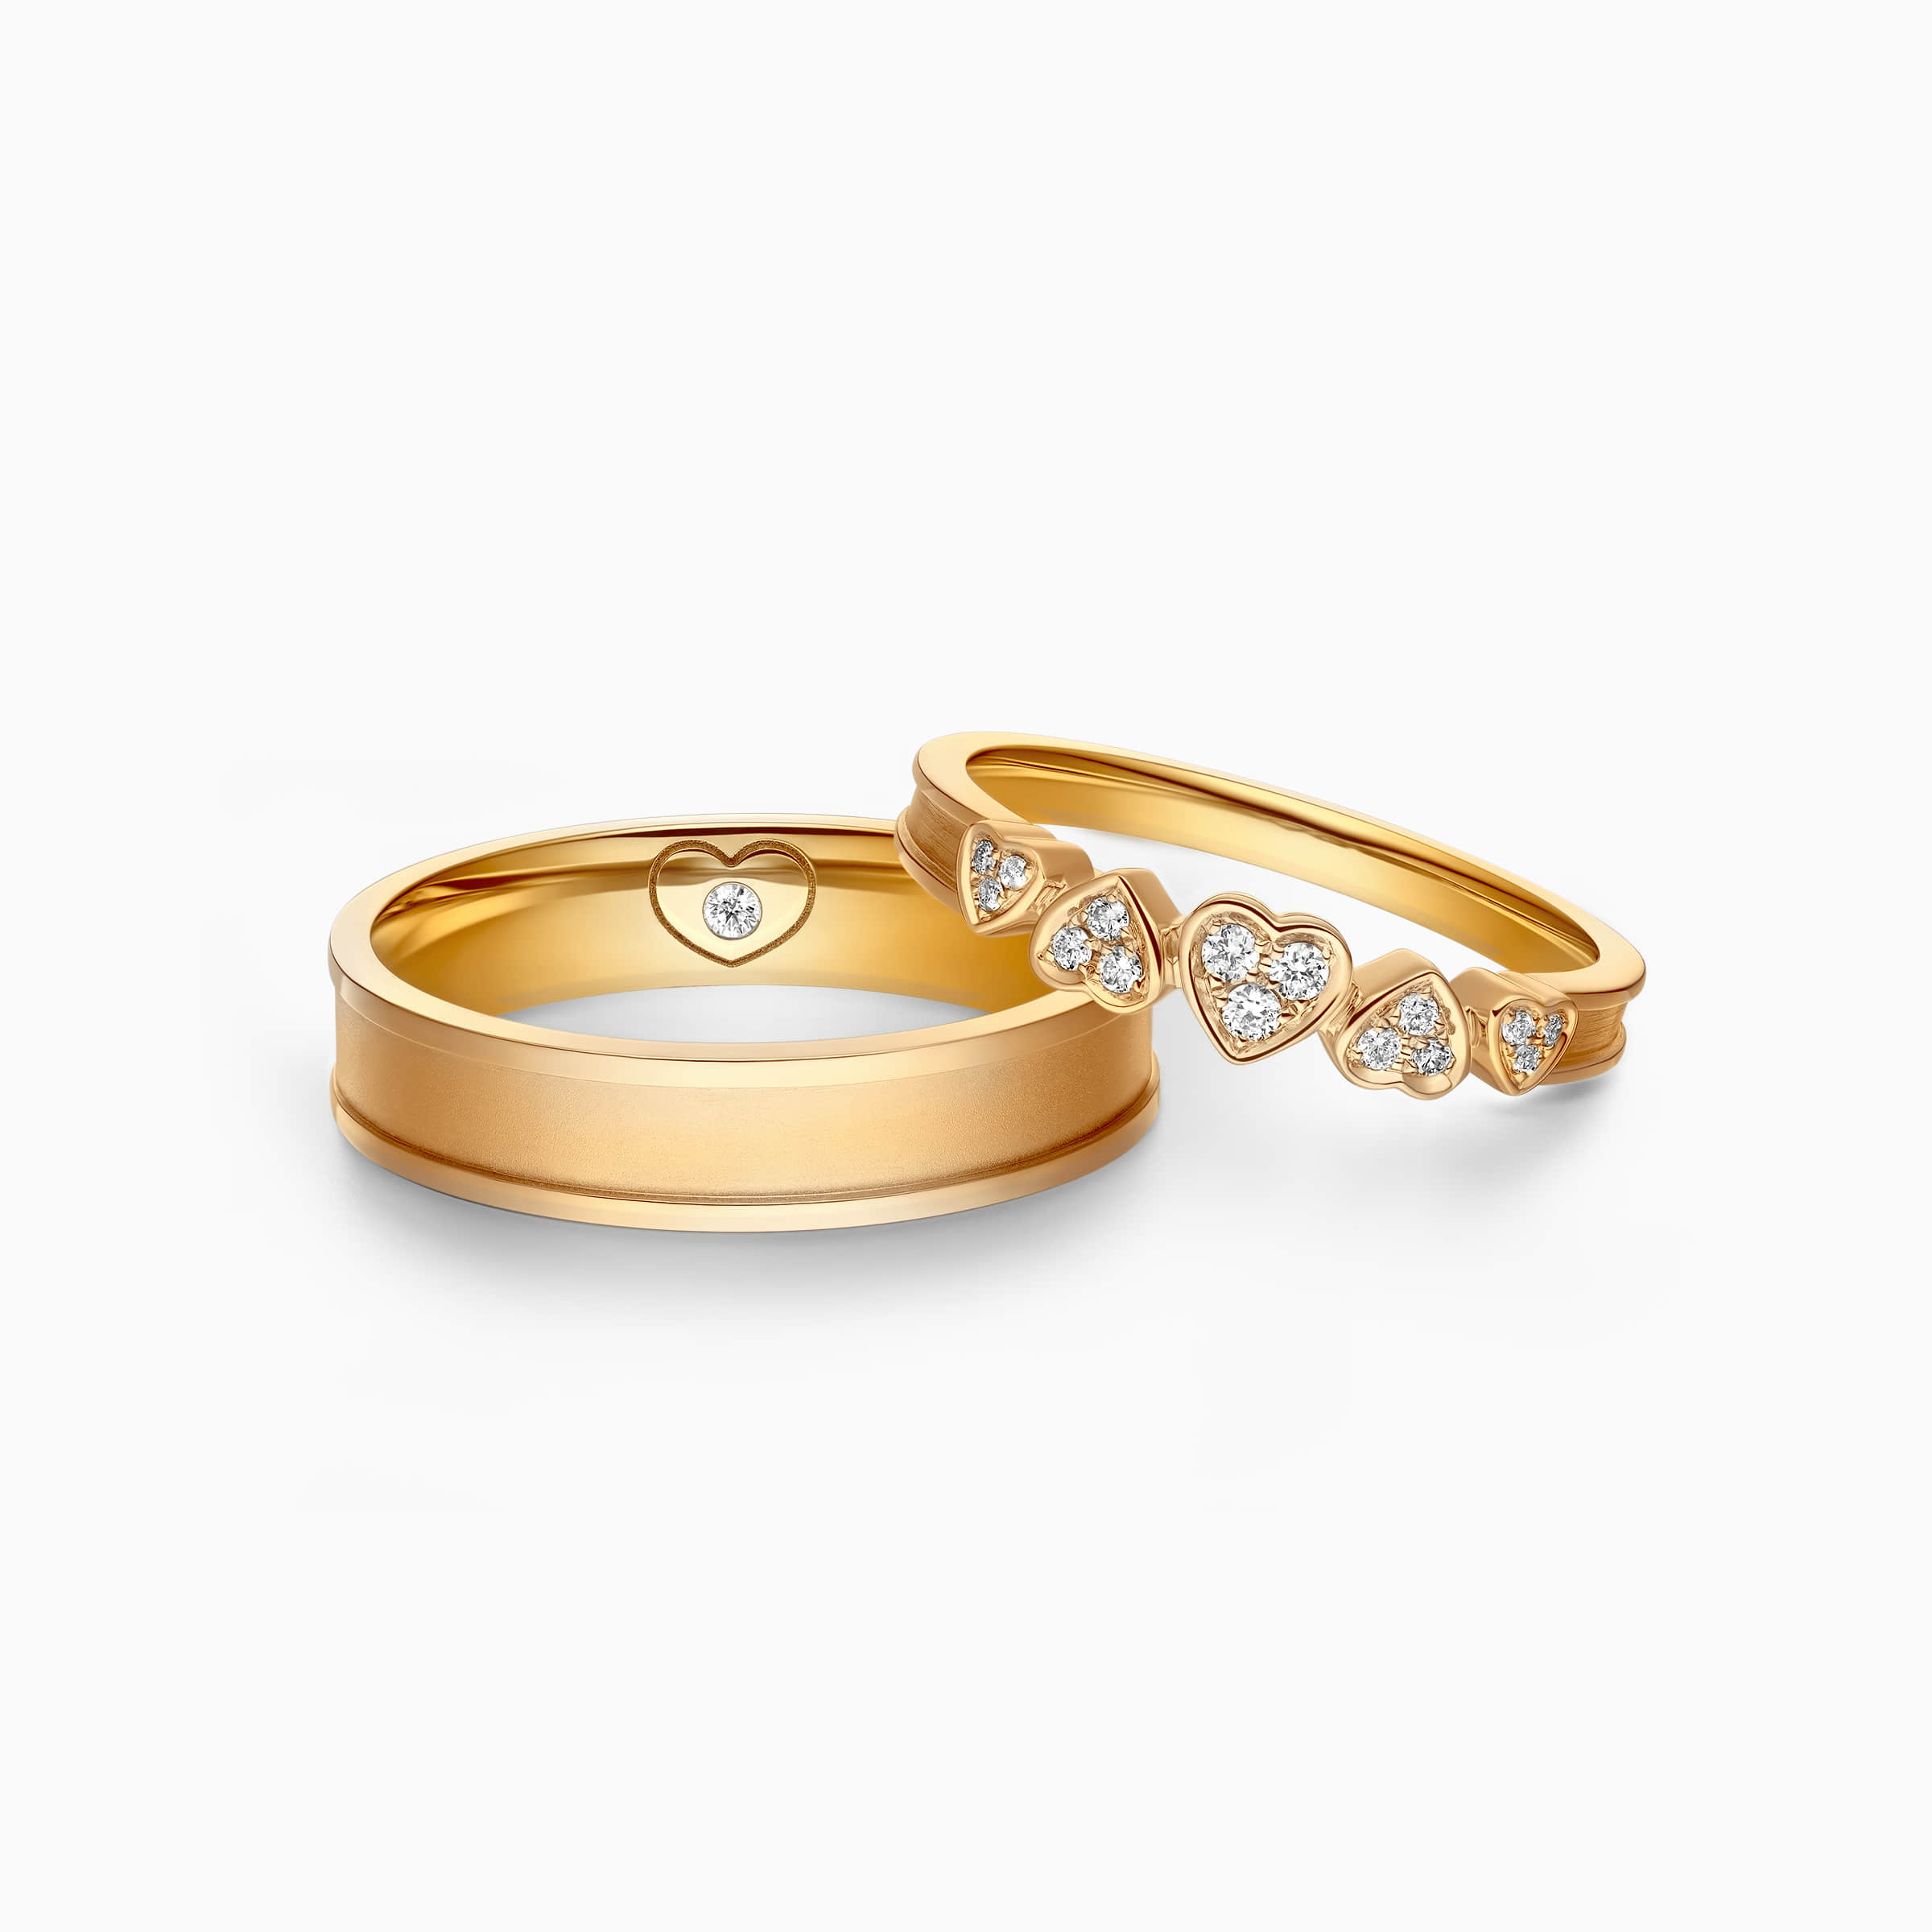 Darry Ring heart wedding ring sets for him and her in yellow gold